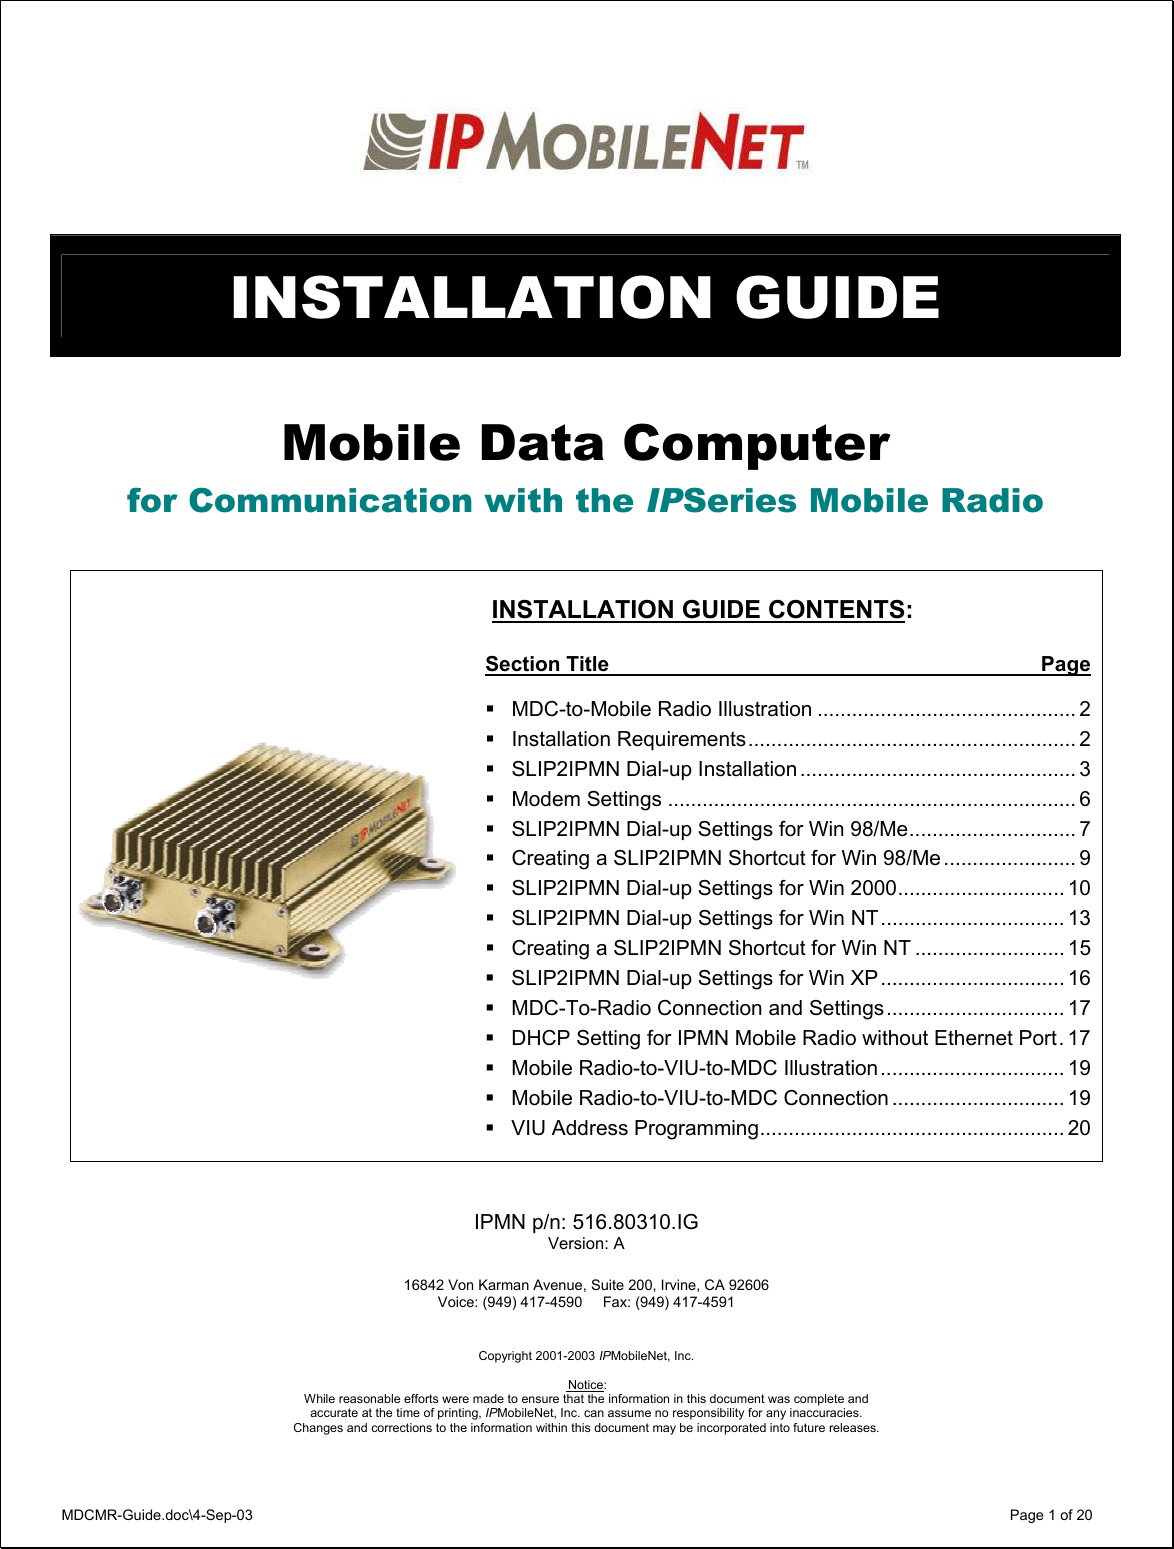 MDCMR-Guide.doc\4-Sep-03   Page 1 of 20    INSTALLATION GUIDE   Mobile Data Computer for Communication with the IPSeries Mobile Radio        INSTALLATION GUIDE CONTENTS:  Section Title  Page  MDC-to-Mobile Radio Illustration ............................................. 2 Installation Requirements......................................................... 2 SLIP2IPMN Dial-up Installation ................................................ 3 Modem Settings ....................................................................... 6 SLIP2IPMN Dial-up Settings for Win 98/Me............................. 7 Creating a SLIP2IPMN Shortcut for Win 98/Me ....................... 9 SLIP2IPMN Dial-up Settings for Win 2000............................. 10 SLIP2IPMN Dial-up Settings for Win NT................................ 13 Creating a SLIP2IPMN Shortcut for Win NT .......................... 15 SLIP2IPMN Dial-up Settings for Win XP................................ 16 MDC-To-Radio Connection and Settings............................... 17 DHCP Setting for IPMN Mobile Radio without Ethernet Port. 17 Mobile Radio-to-VIU-to-MDC Illustration................................ 19 Mobile Radio-to-VIU-to-MDC Connection .............................. 19 VIU Address Programming..................................................... 20    IPMN p/n: 516.80310.IG Version: A  16842 Von Karman Avenue, Suite 200, Irvine, CA 92606  Voice: (949) 417-4590     Fax: (949) 417-4591    Copyright 2001-2003 IPMobileNet, Inc.   Notice:  While reasonable efforts were made to ensure that the information in this document was complete and accurate at the time of printing, IPMobileNet, Inc. can assume no responsibility for any inaccuracies.  Changes and corrections to the information within this document may be incorporated into future releases.